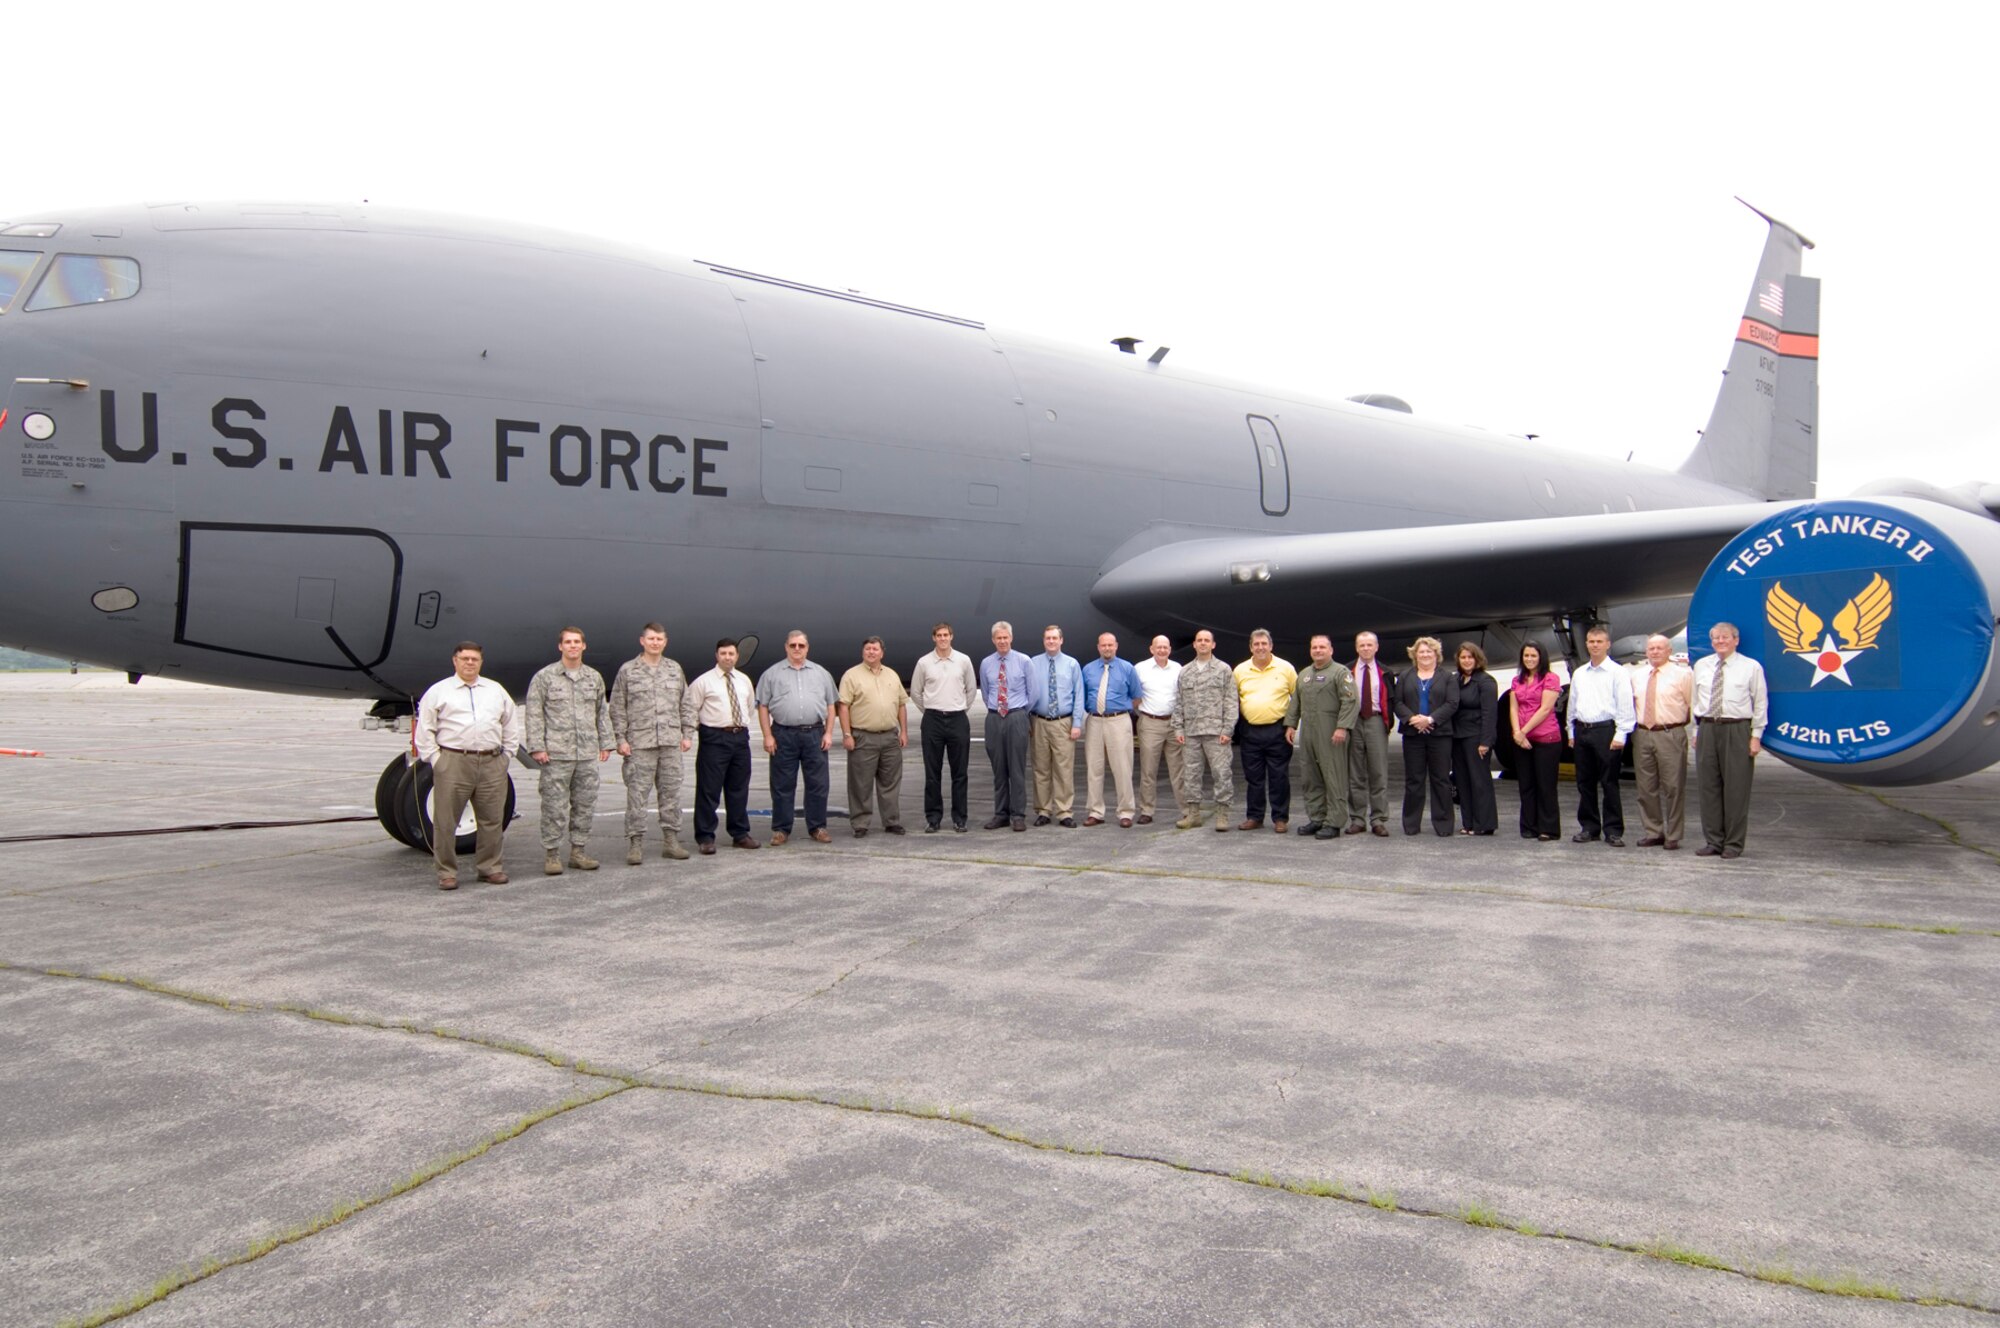 HANSCOM AIR FORCE BASE, Mass. -- Personnel from the Senior Leadership C3 System - Airborne Communications Program office line up in front of a modified KC-135 known as Test Tanker II June 30.  The program team will use Test Tanker II to test standardized command, control and communications (C3) equipment that will be incorporated on a special fleet of aircraft used to transport senior U.S. officials.  (USAF Photo by Rick Berry)